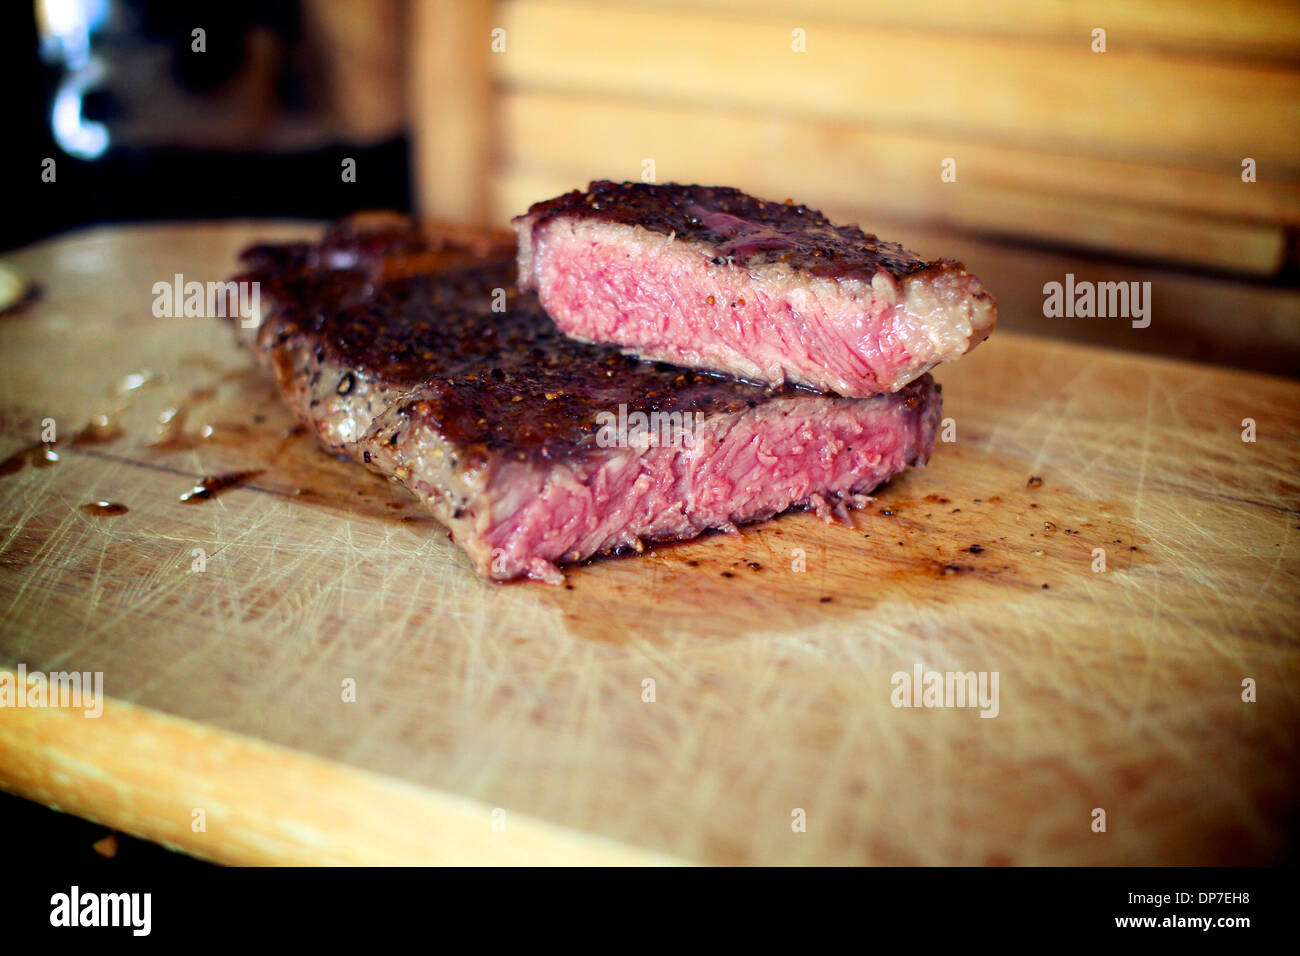 Rare cooked beef sirloin steak grill Stock Photo